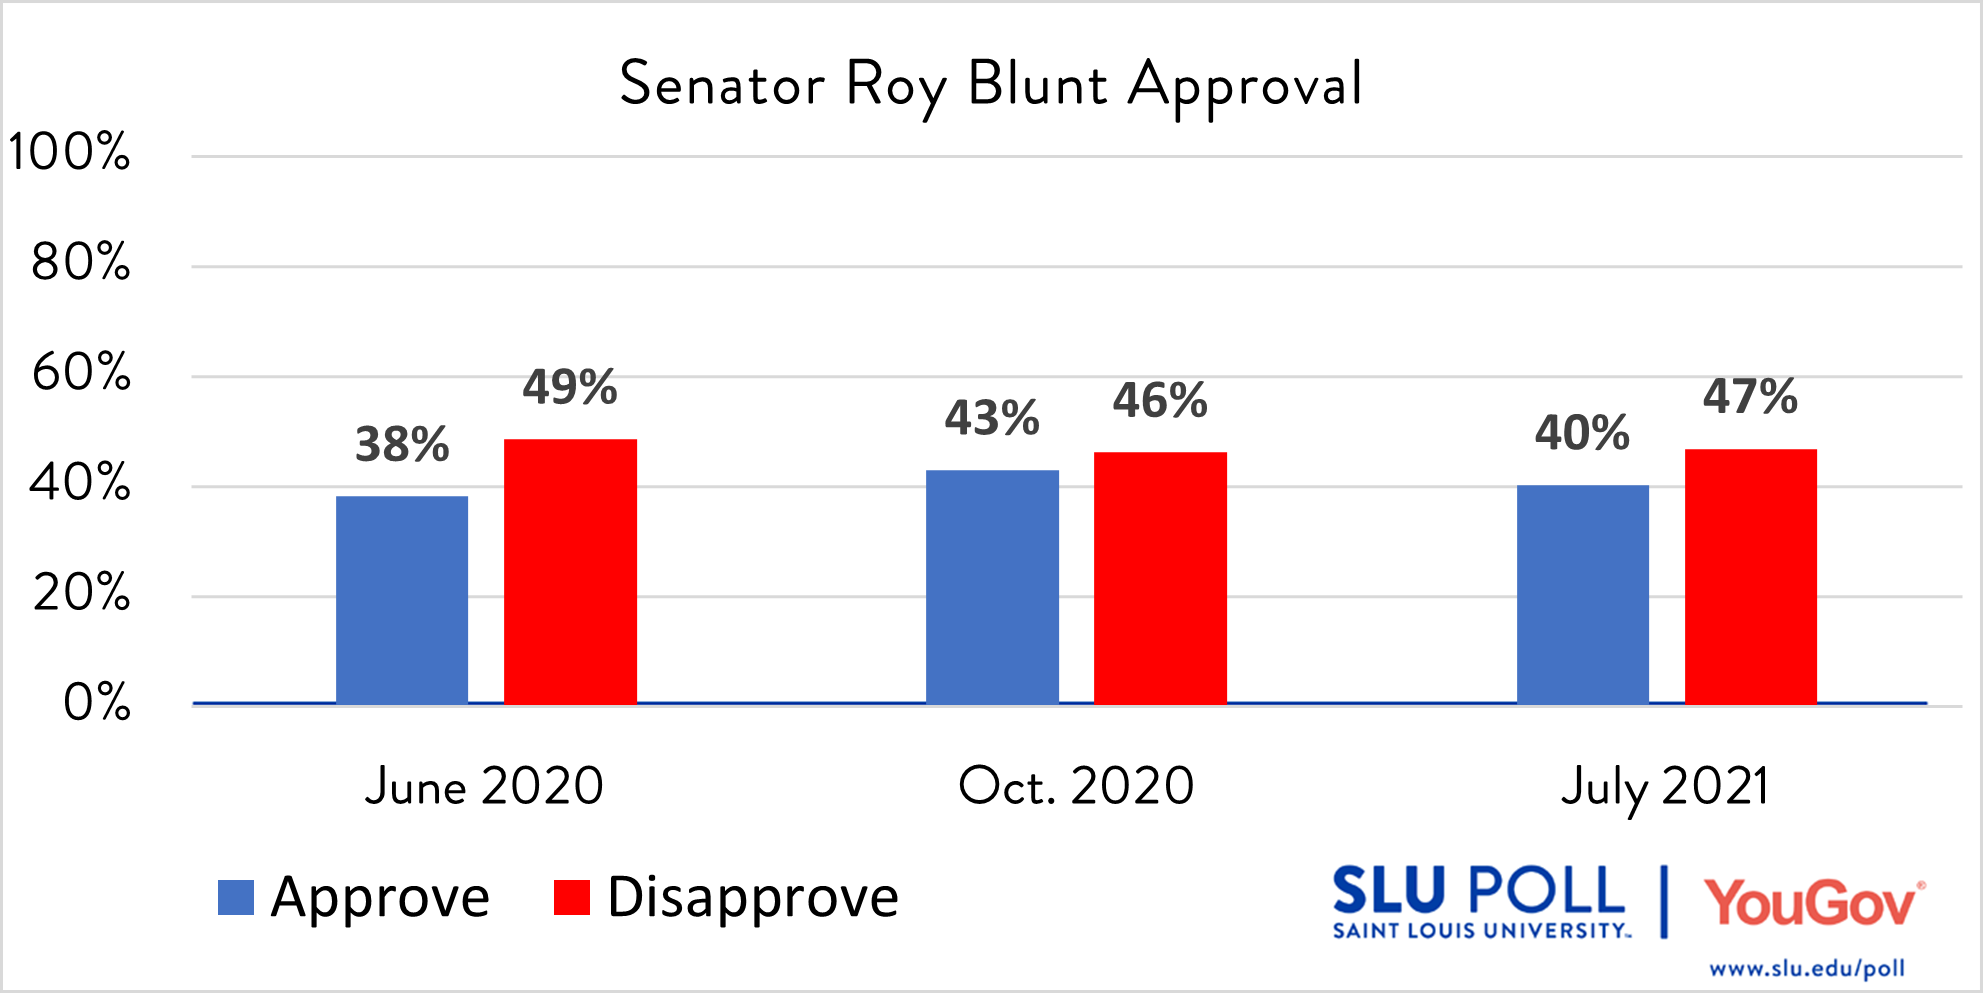 Do you approve or disapprove of the way each is doing their job…Senator Roy Blunt?  - Strongly Approve: 10% - Approve: 30% - Disapprove: 25% - Strongly Disapprove: 22%  - Not Sure: 13%